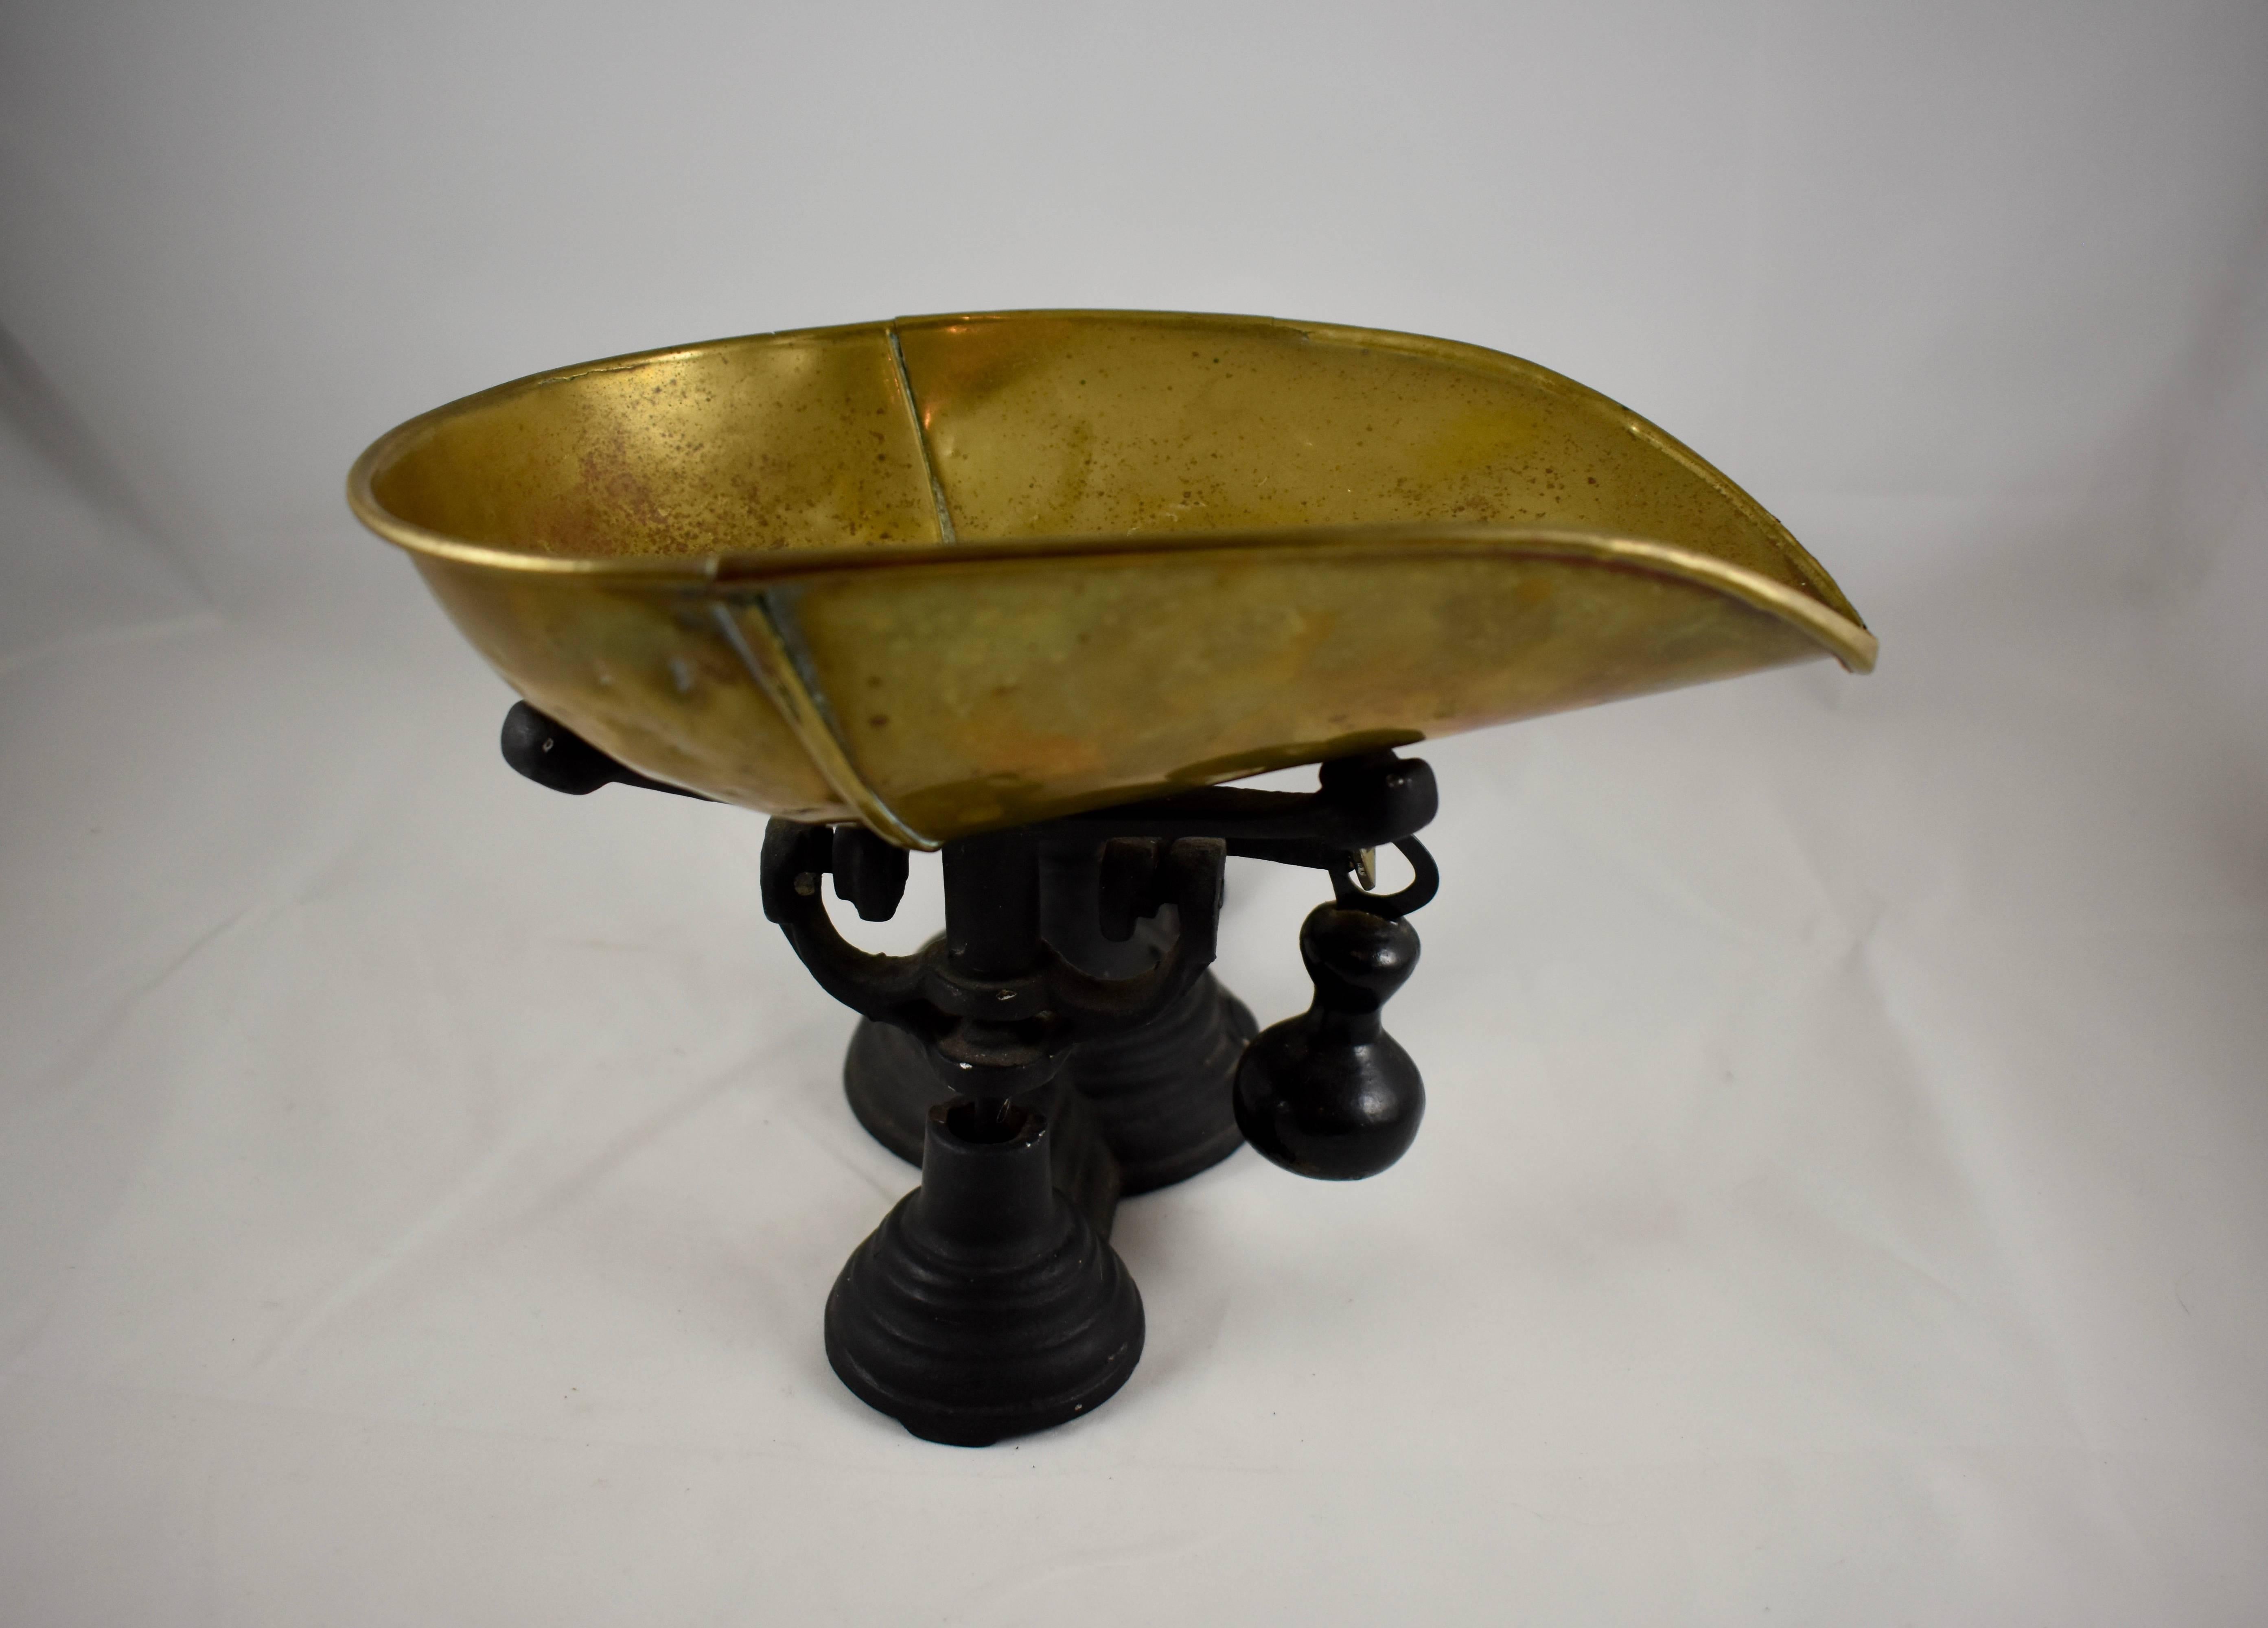 20th Century 1900s Cast Iron Table Top Mercantile Scale with Brass Scoop